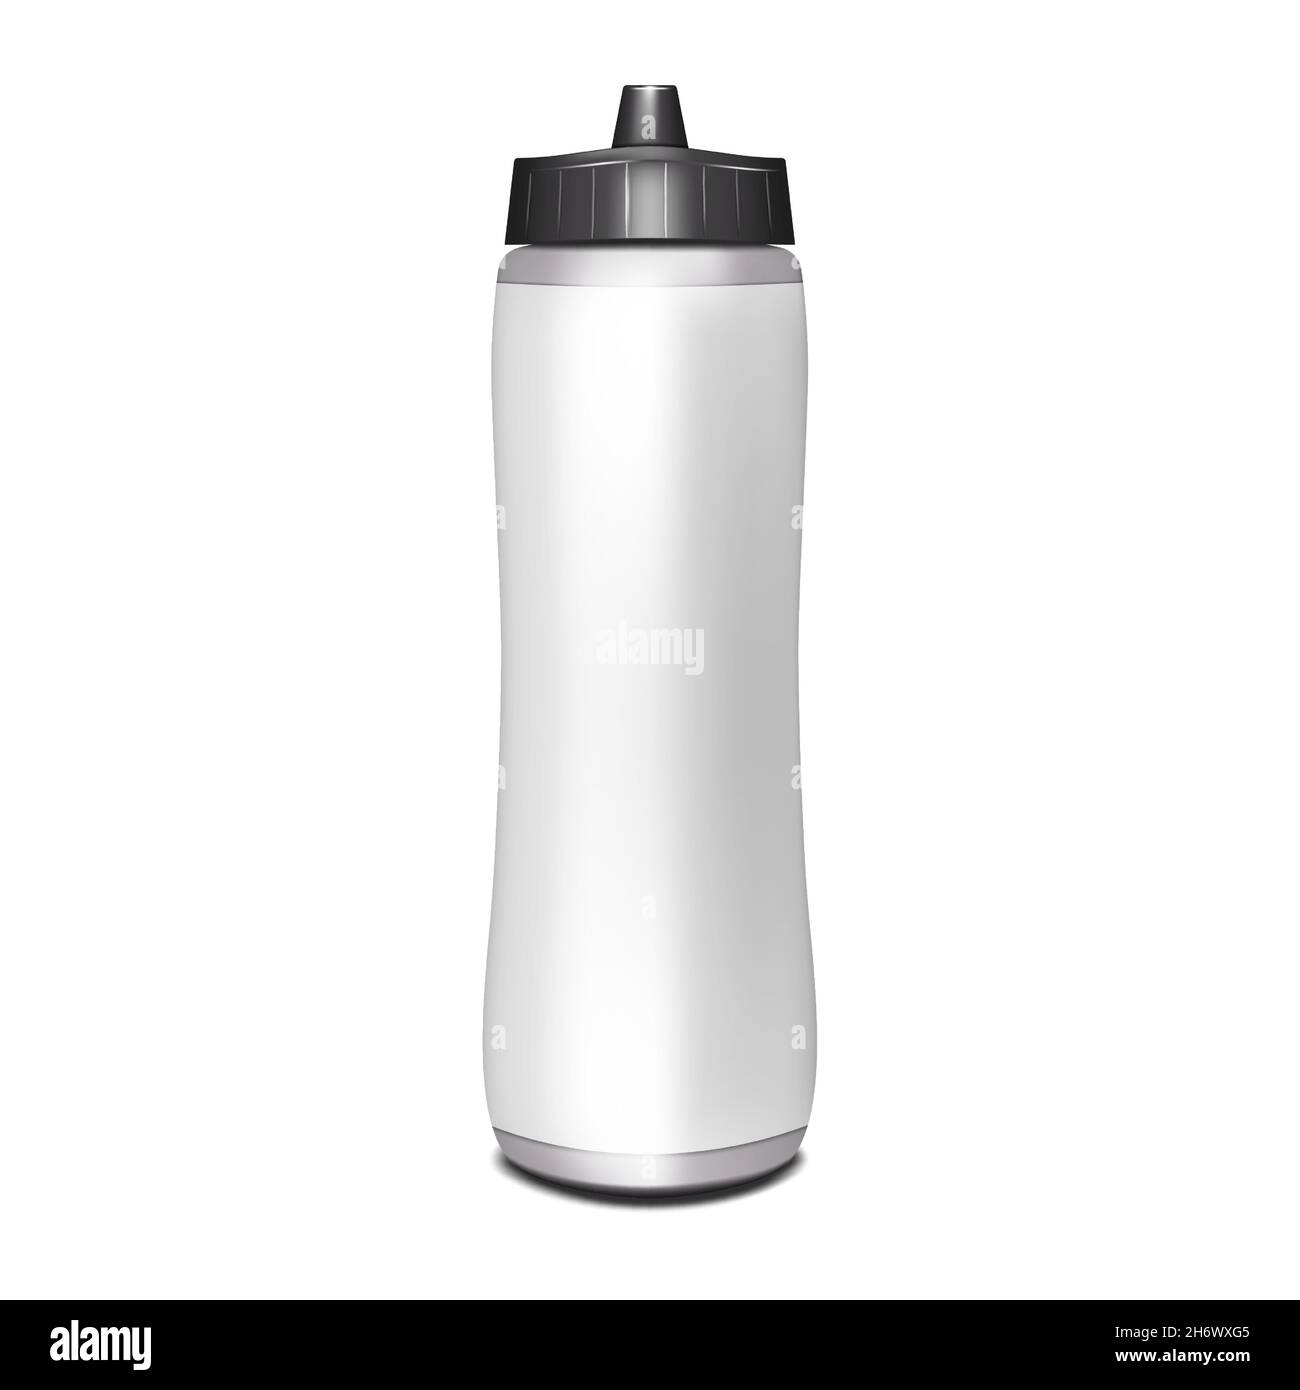 https://c8.alamy.com/comp/2H6WXG5/insulated-water-bottle-with-blank-white-label-and-black-cap-mock-up-fitness-sport-flask-mockup-realistic-vector-template-for-design-2H6WXG5.jpg